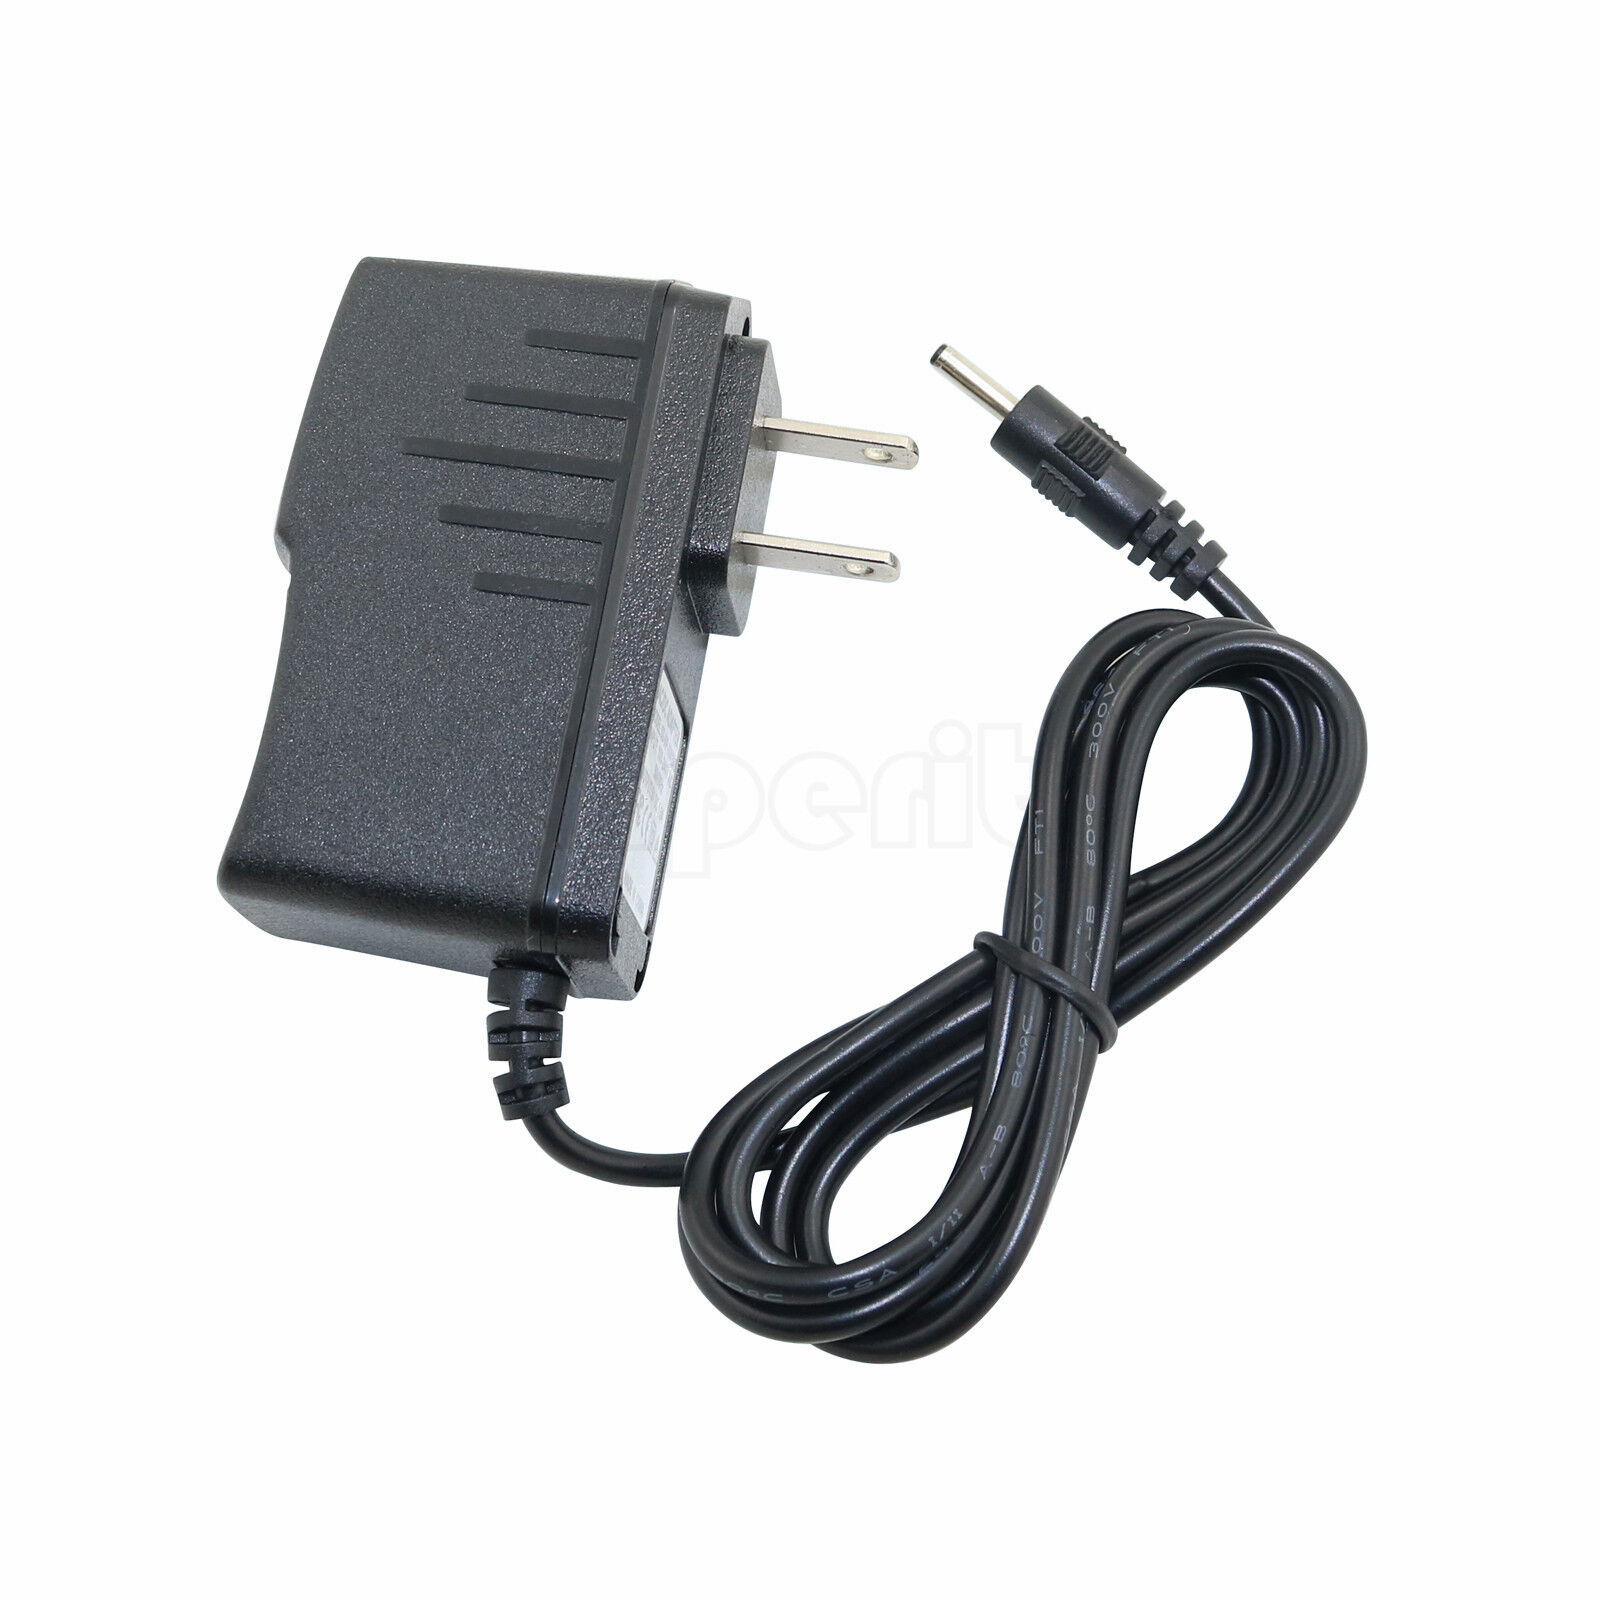 *Brand NEW* AC/DC Power Supply Adapter Wall Home Charger Cord For RCA 7" / 9" Tablet AC/DC Power Supply Adapte